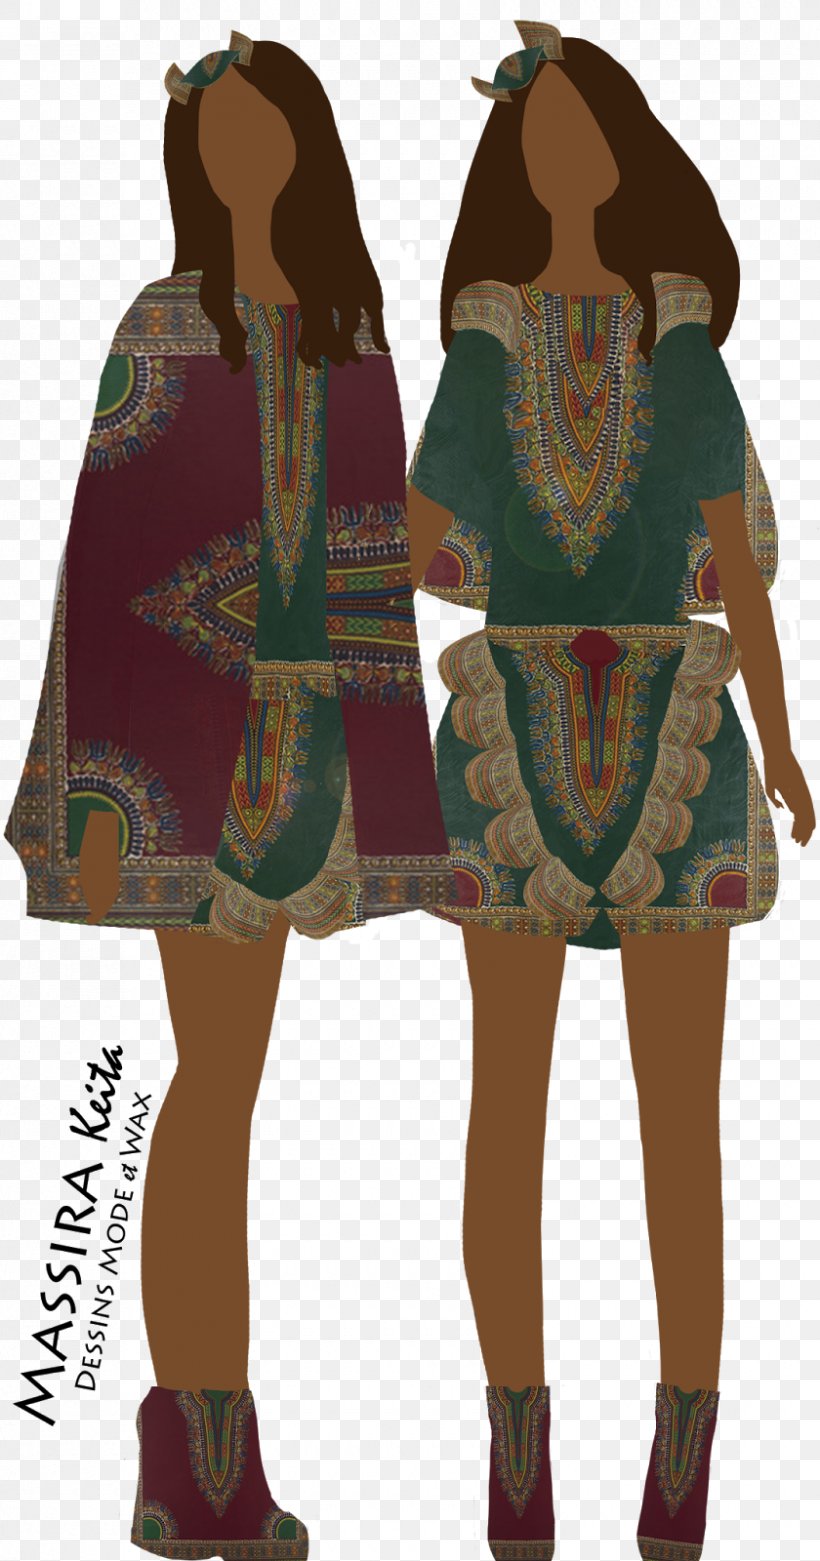 Costume Design Outerwear, PNG, 840x1600px, Costume Design, Costume, Outerwear Download Free